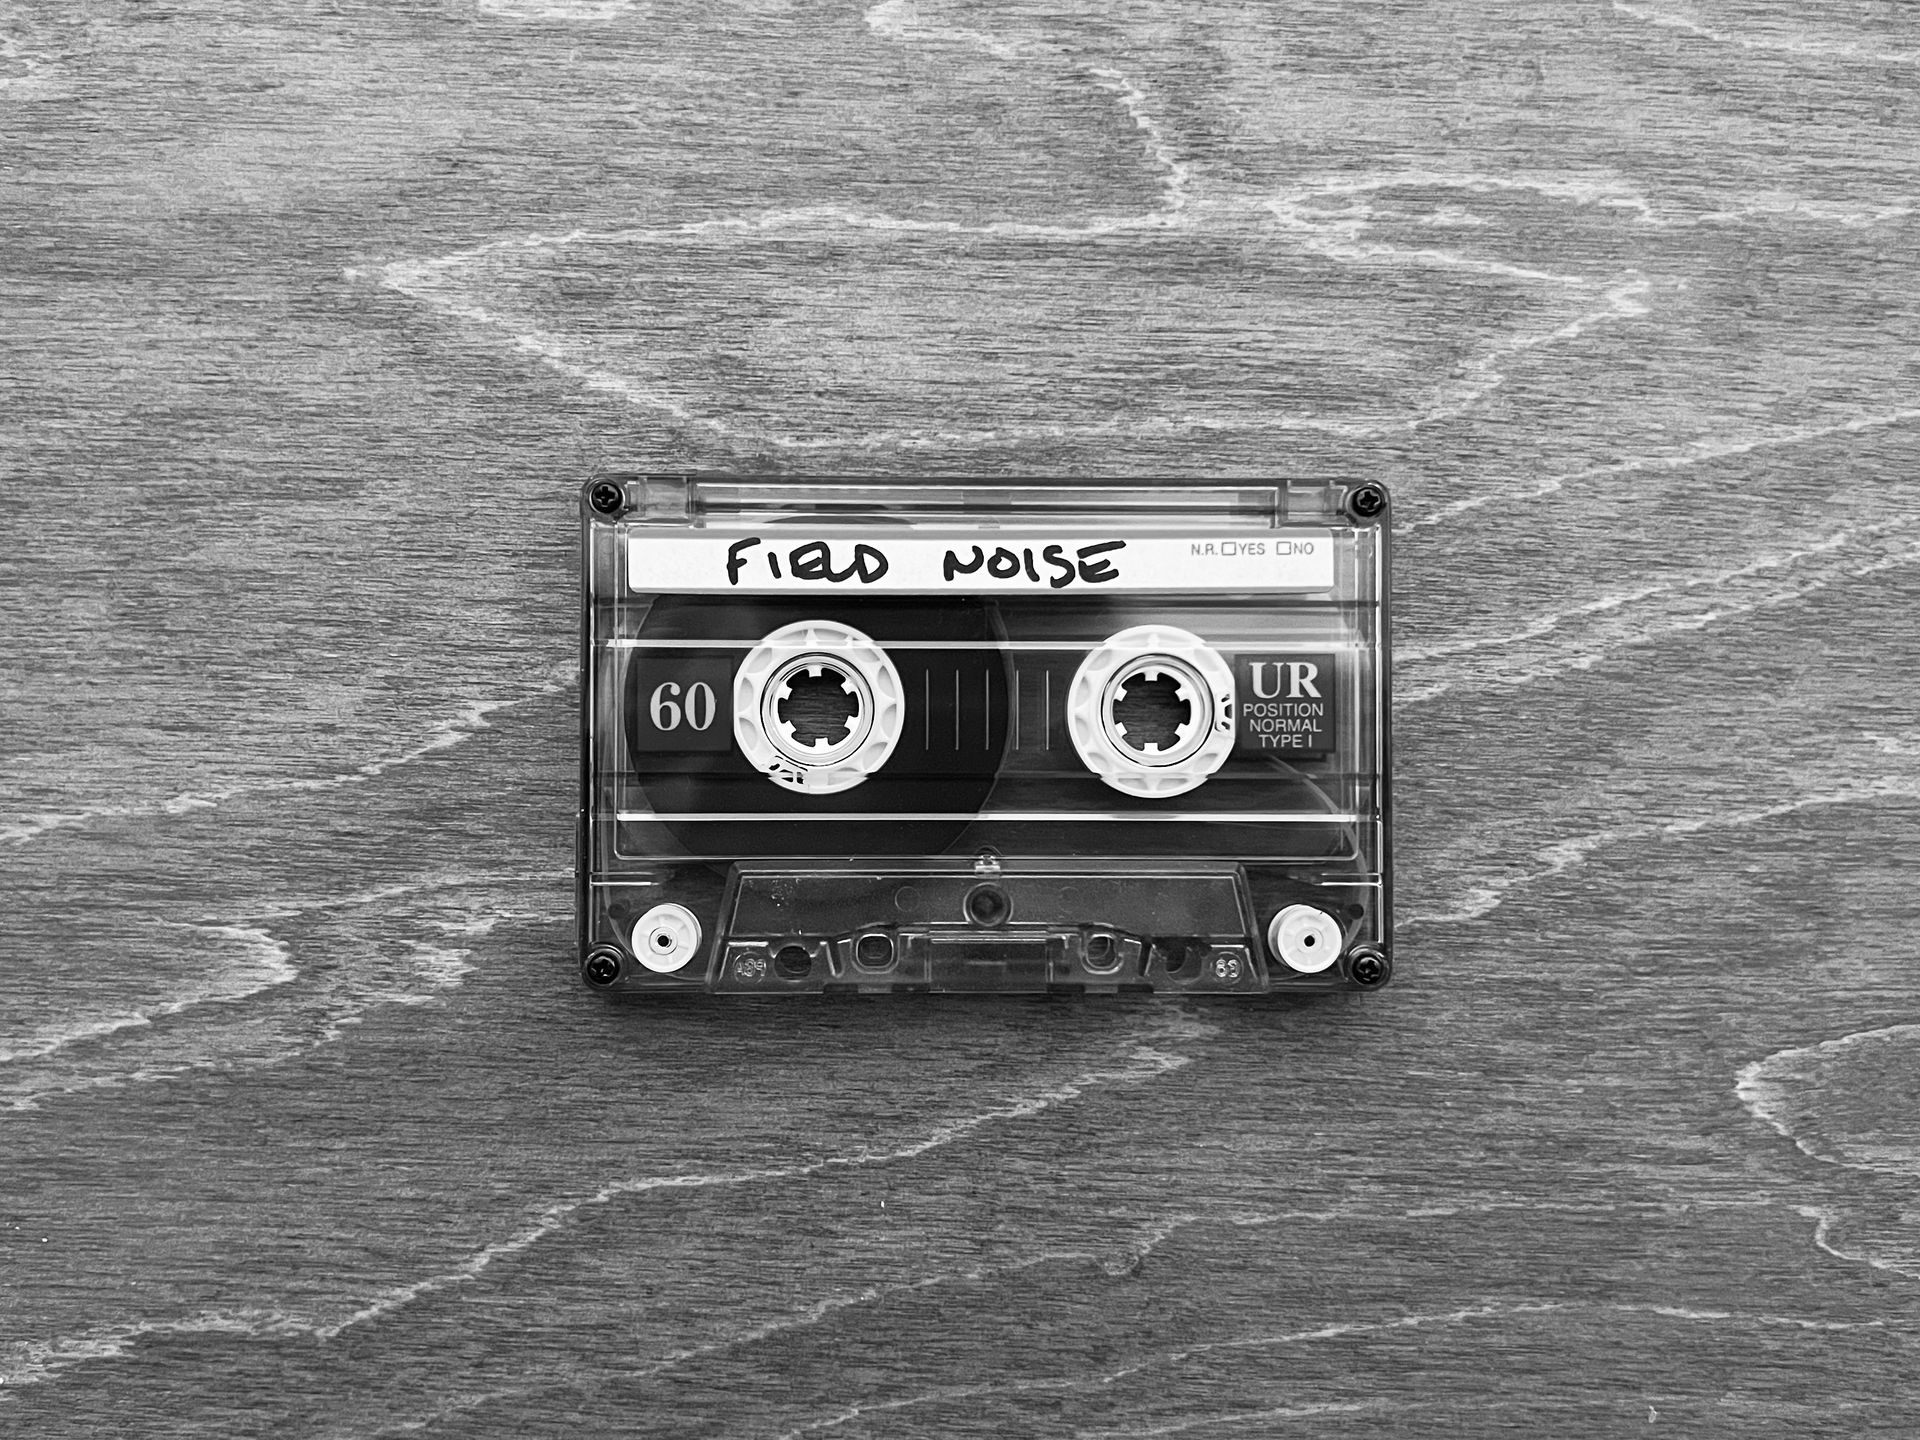 a black and white photo of a cassette tape labeled "field noise" sitting on a wooden desk.